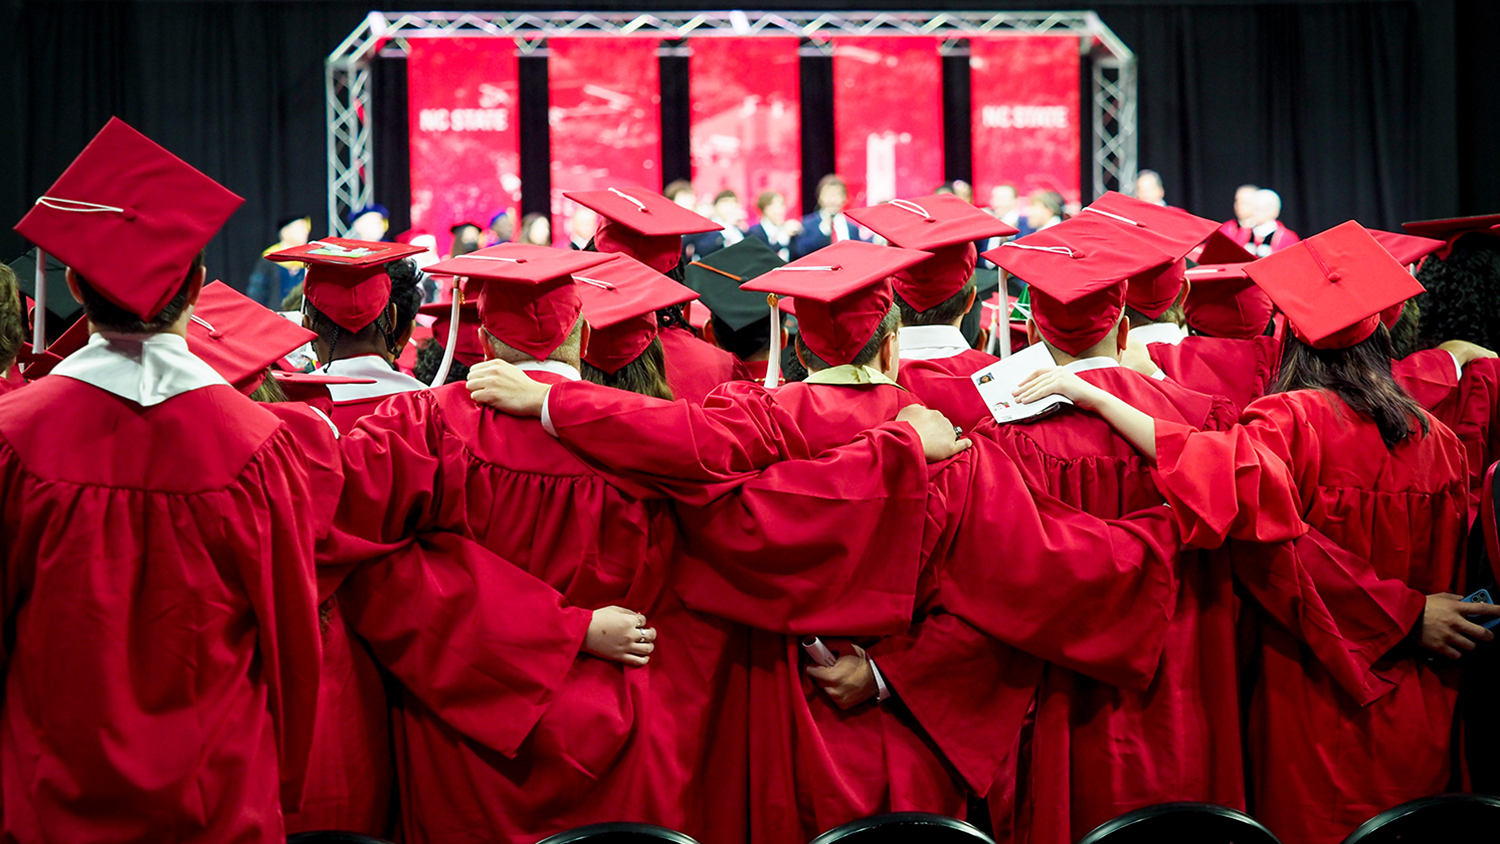 Students celebrate their fall 2022 graduation during commencement exercises on December 17 at PNC Arena. All are dressed in NC State red caps and gowns.